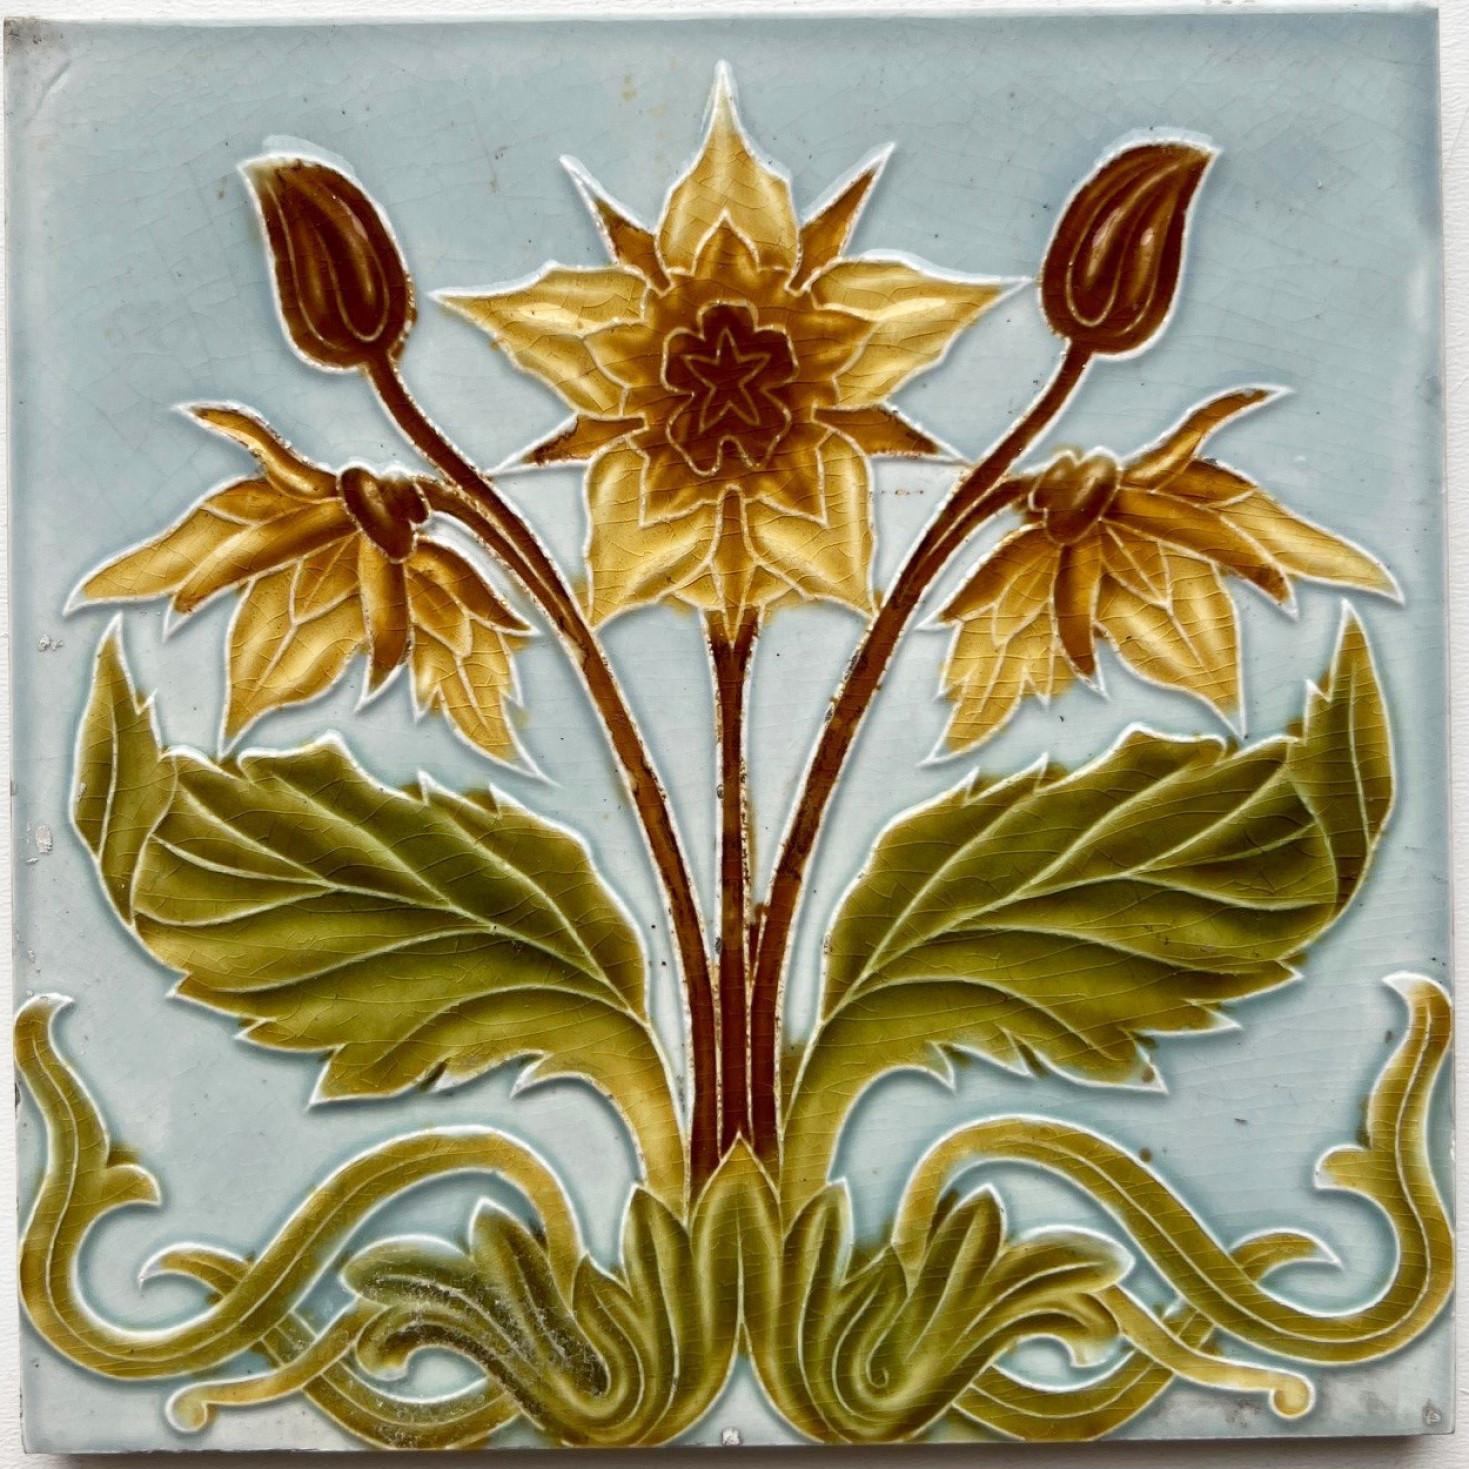 44 pcs of colorful wall tiles with image in relief. Art Nouveau/Jugendstil manufactured in Belgium, Europe early 20th century. The tiles show an image of a yellow flower on light blue background.
These tiles would be charming displayed on easels,